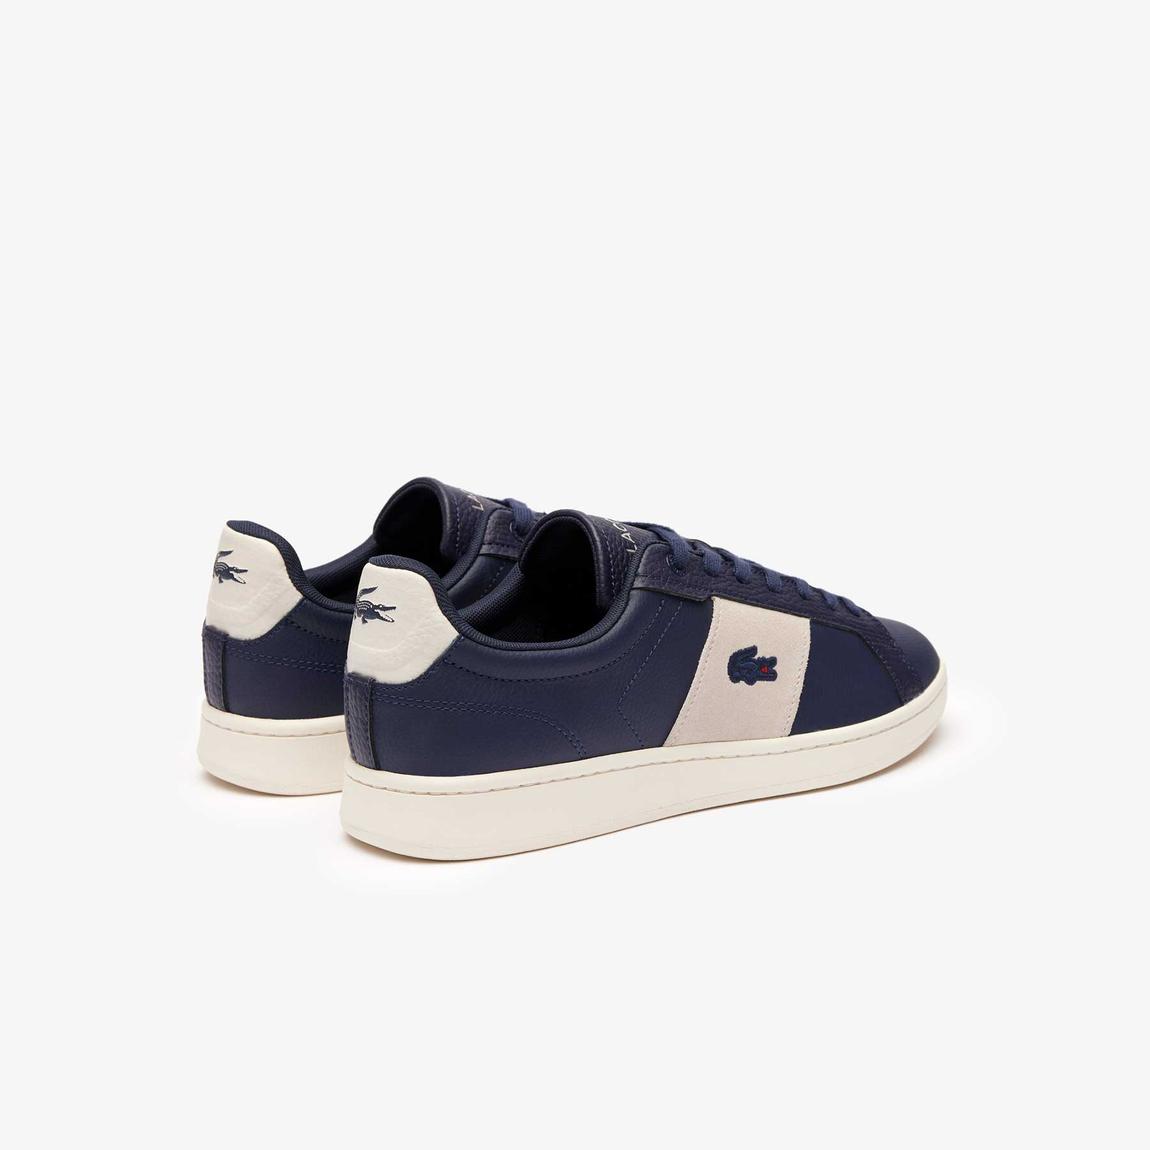 Carnaby Pro 2233 Sneakers Navy Blue/Off White Leather